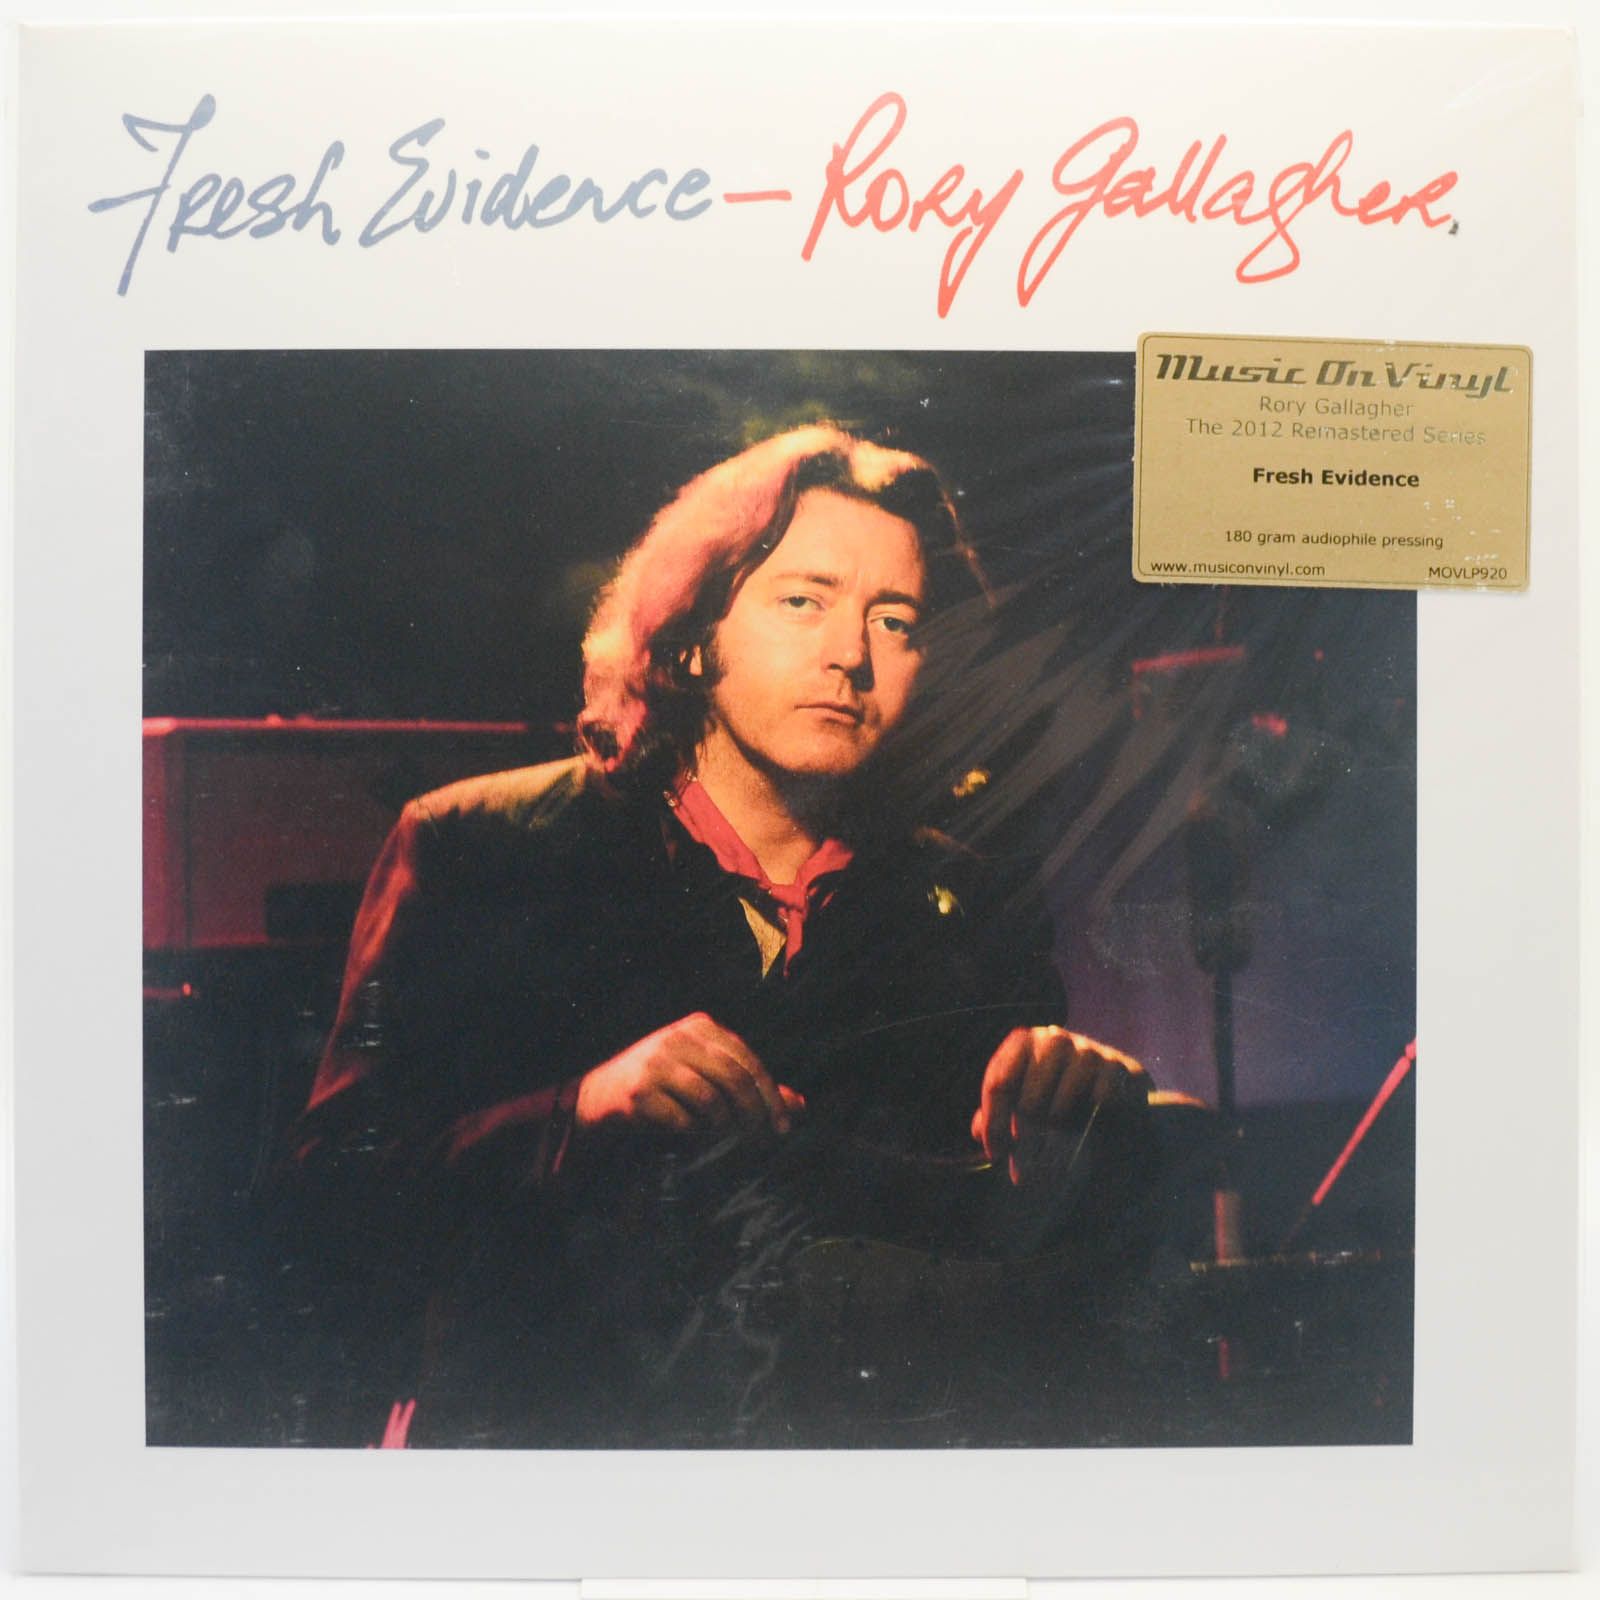 Rory Gallagher — Fresh Evidence, 1990